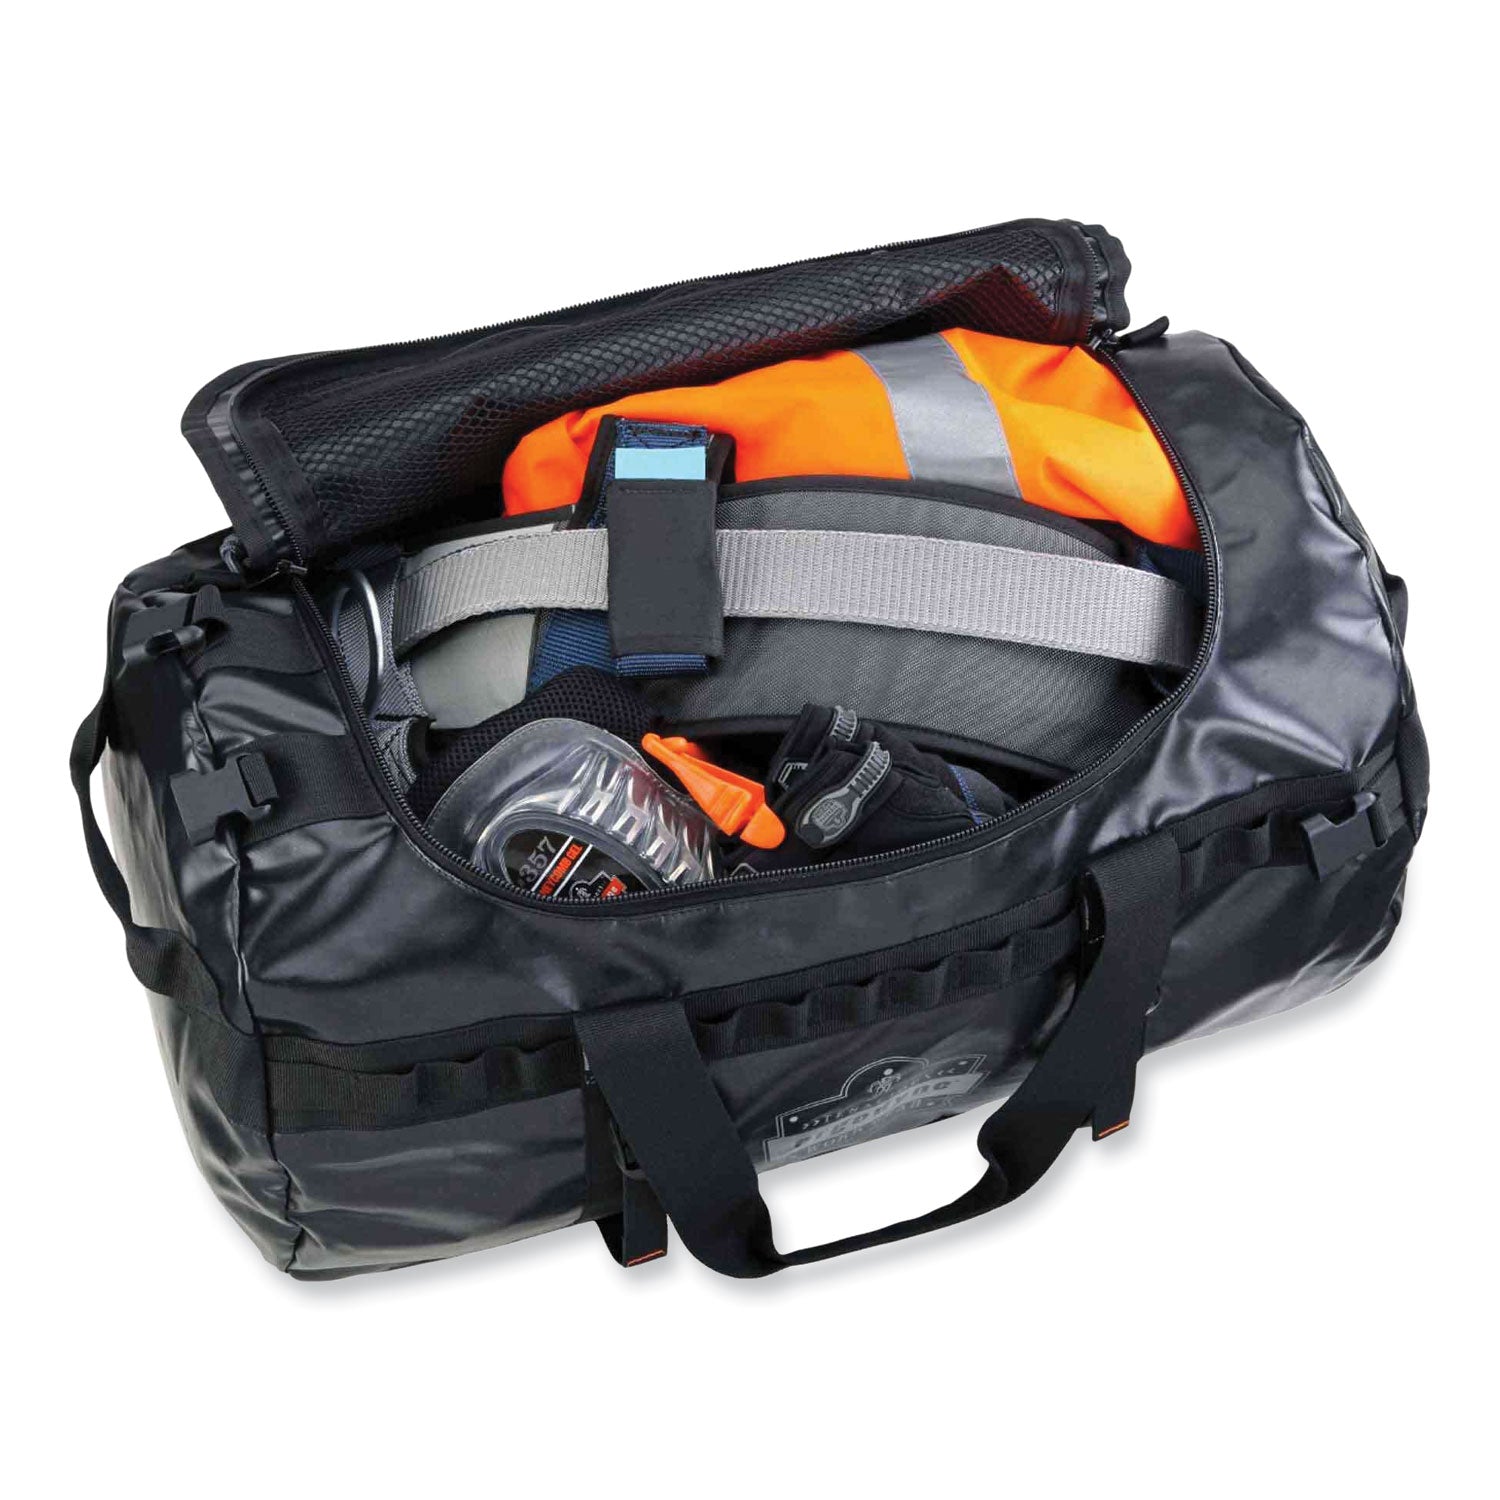 arsenal-5030-water-resistant-duffel-bag-small-135-x-235-x-135-black-ships-in-1-3-business-days_ego13030 - 3